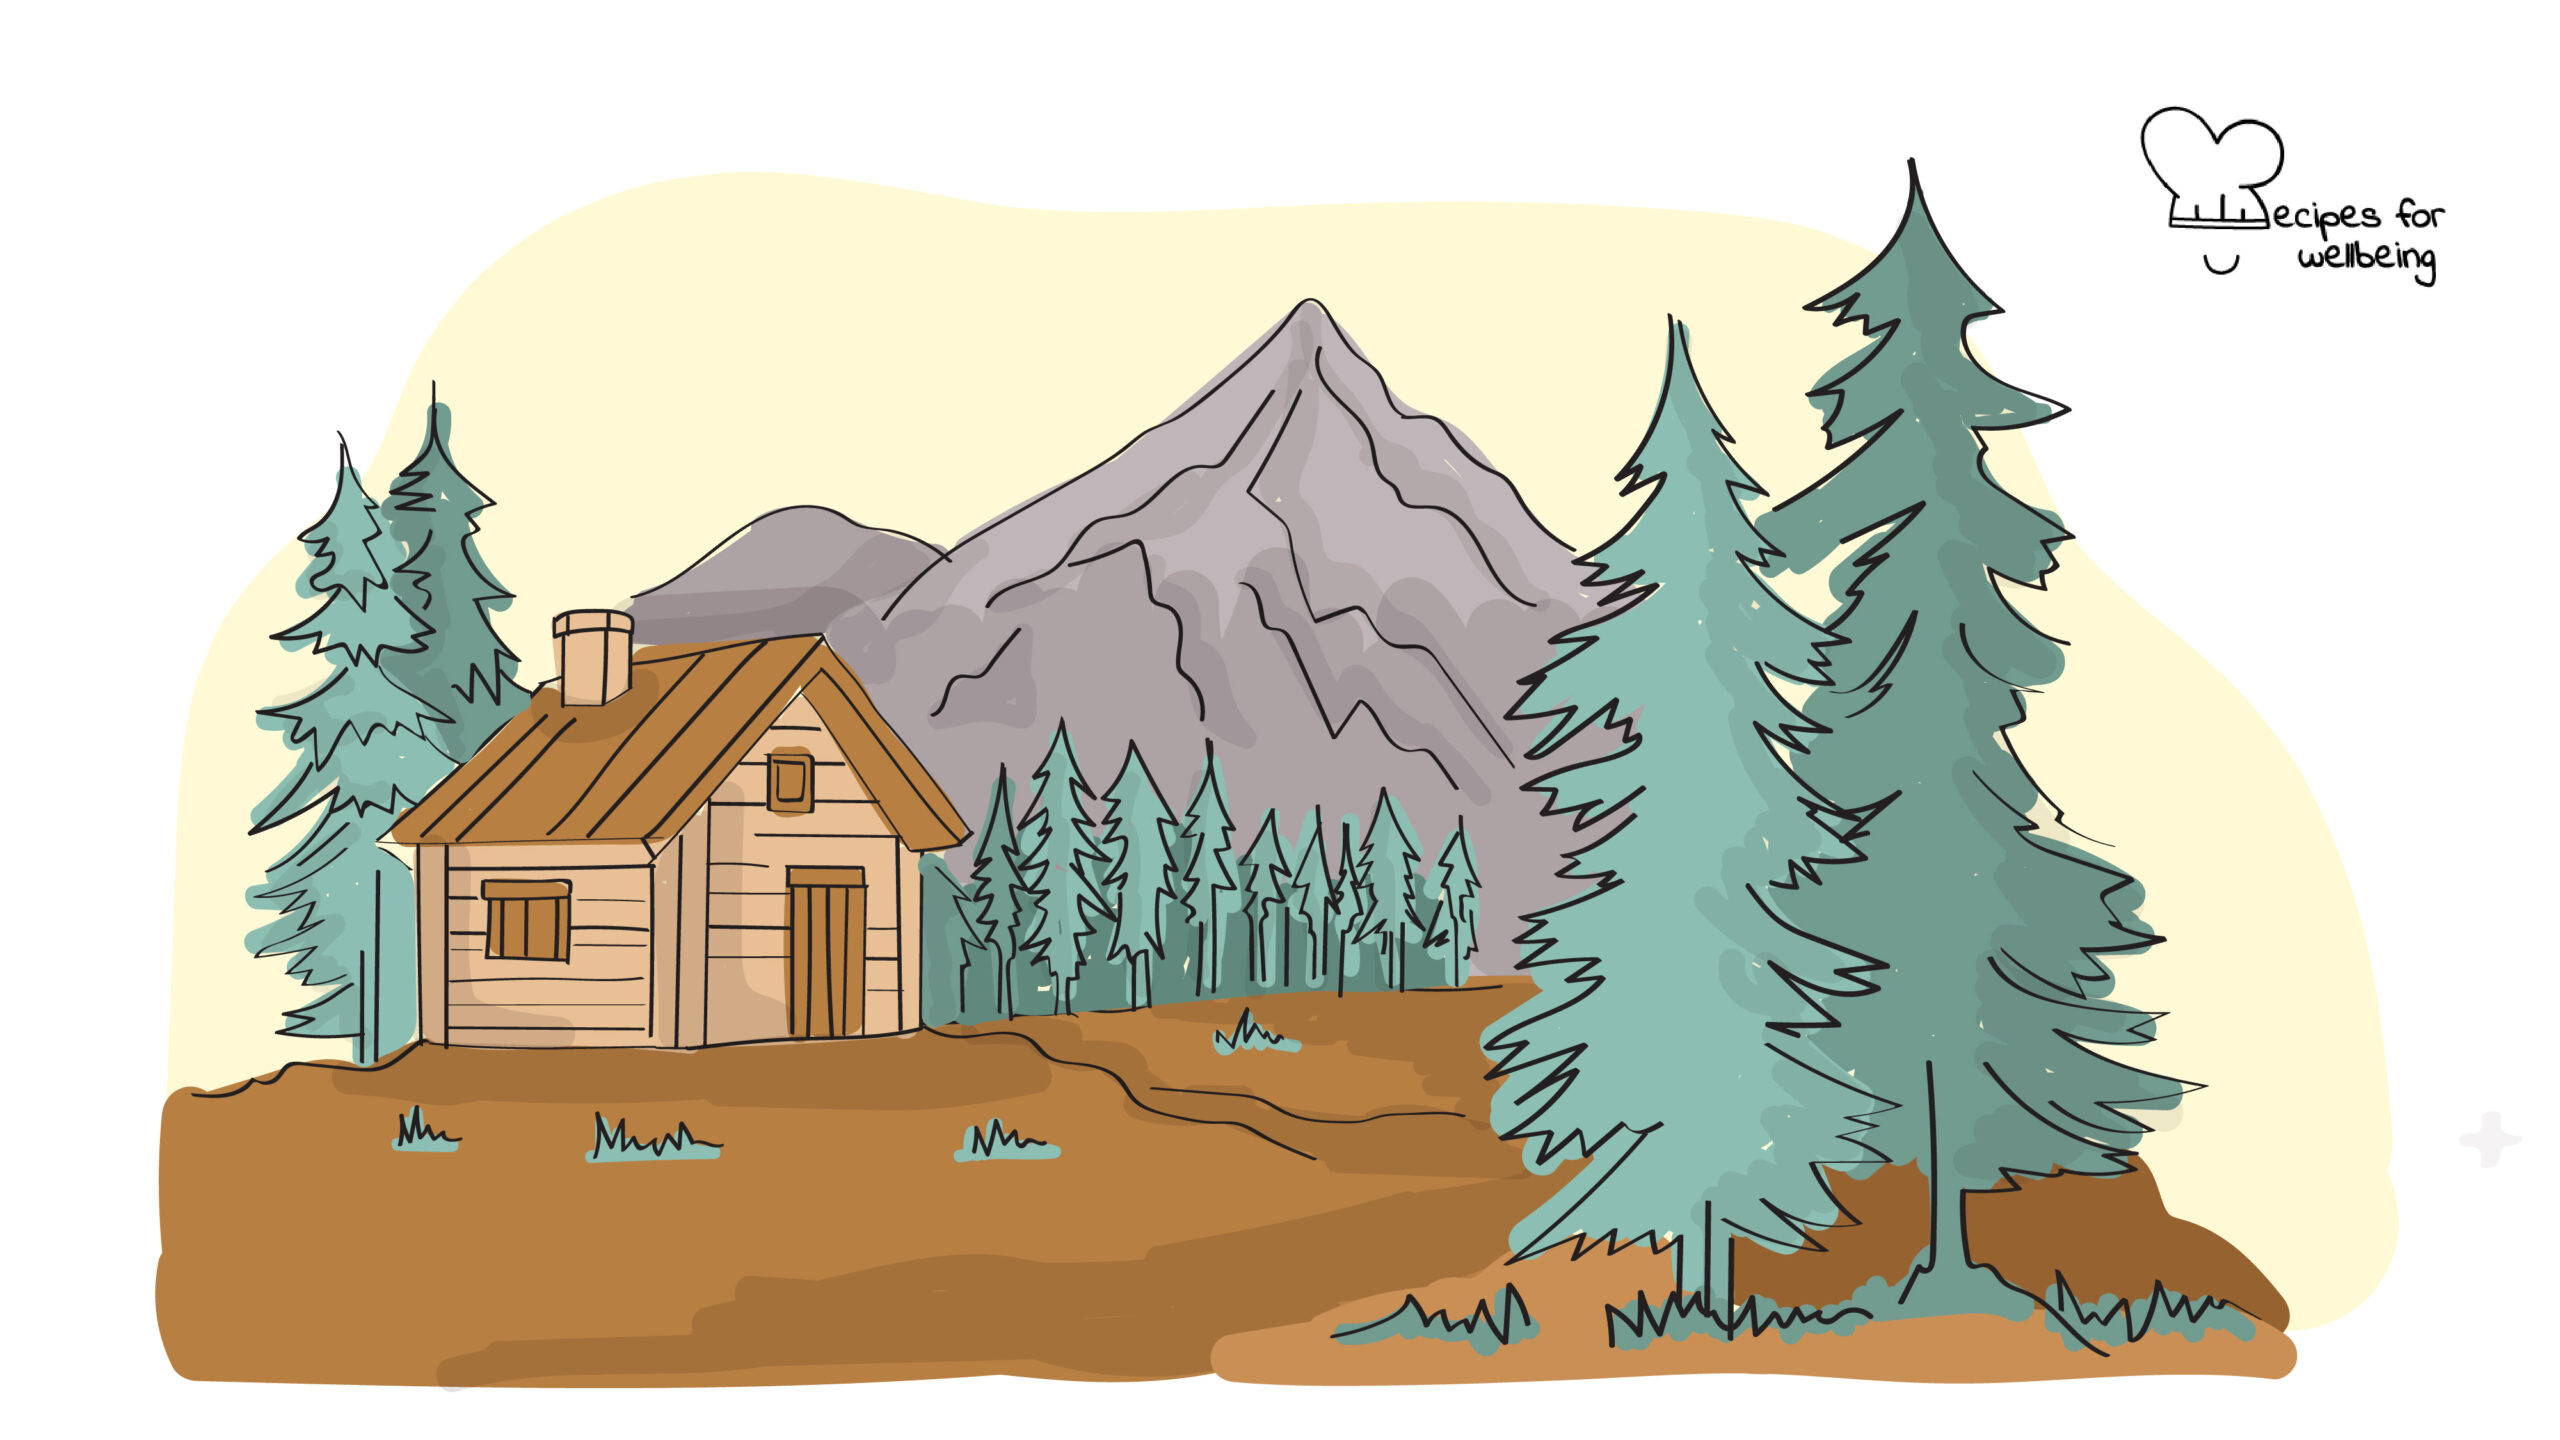 Illustration of a mountain refuge in the mountains. © Recipes for Wellbeing